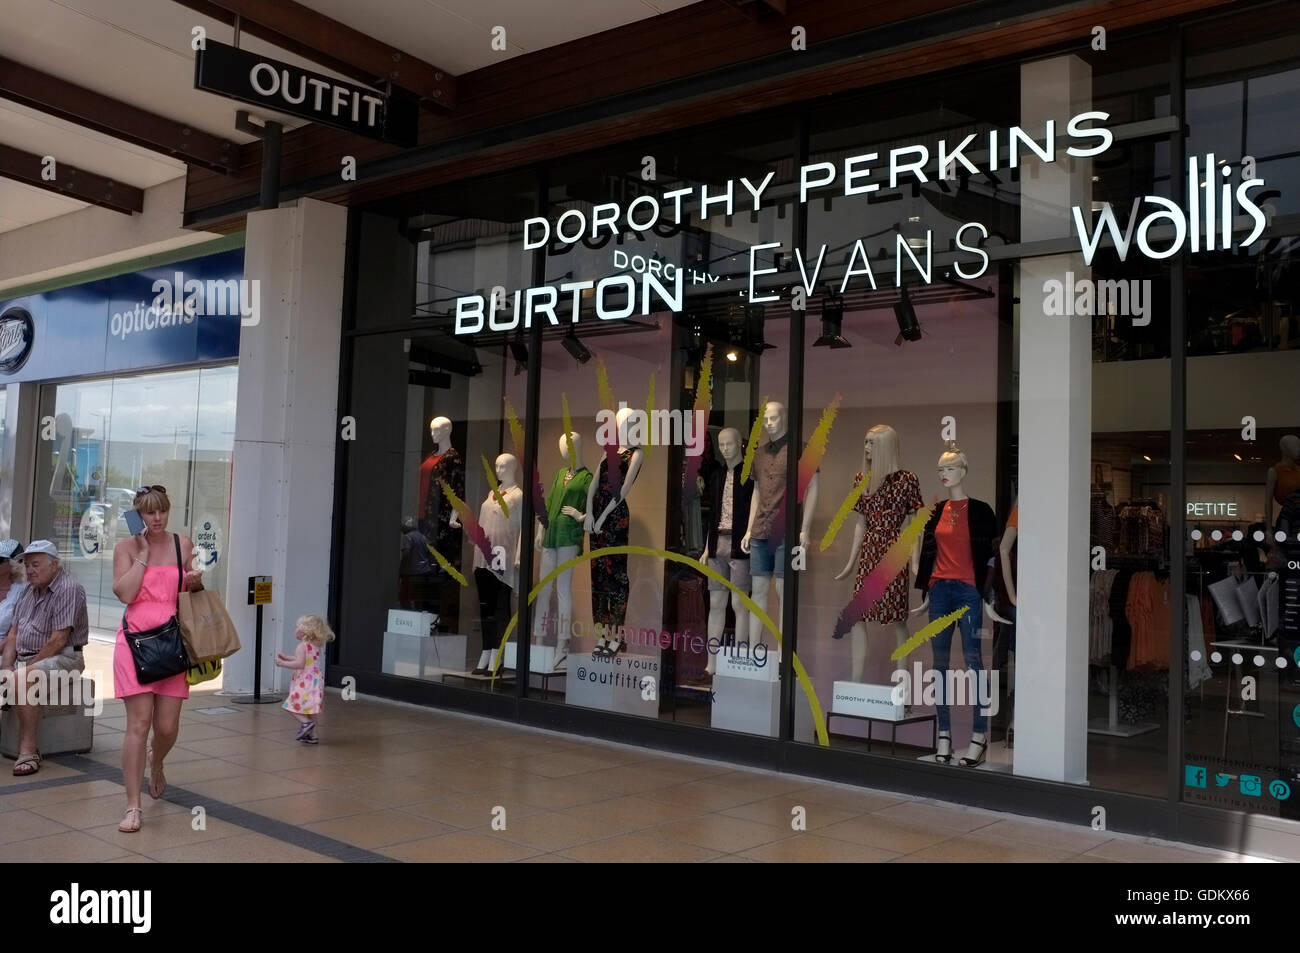 dorothy perkins womens clothing shop branch in westwood cross shopping centre thanet east kent uk july 2016 Stock Photo